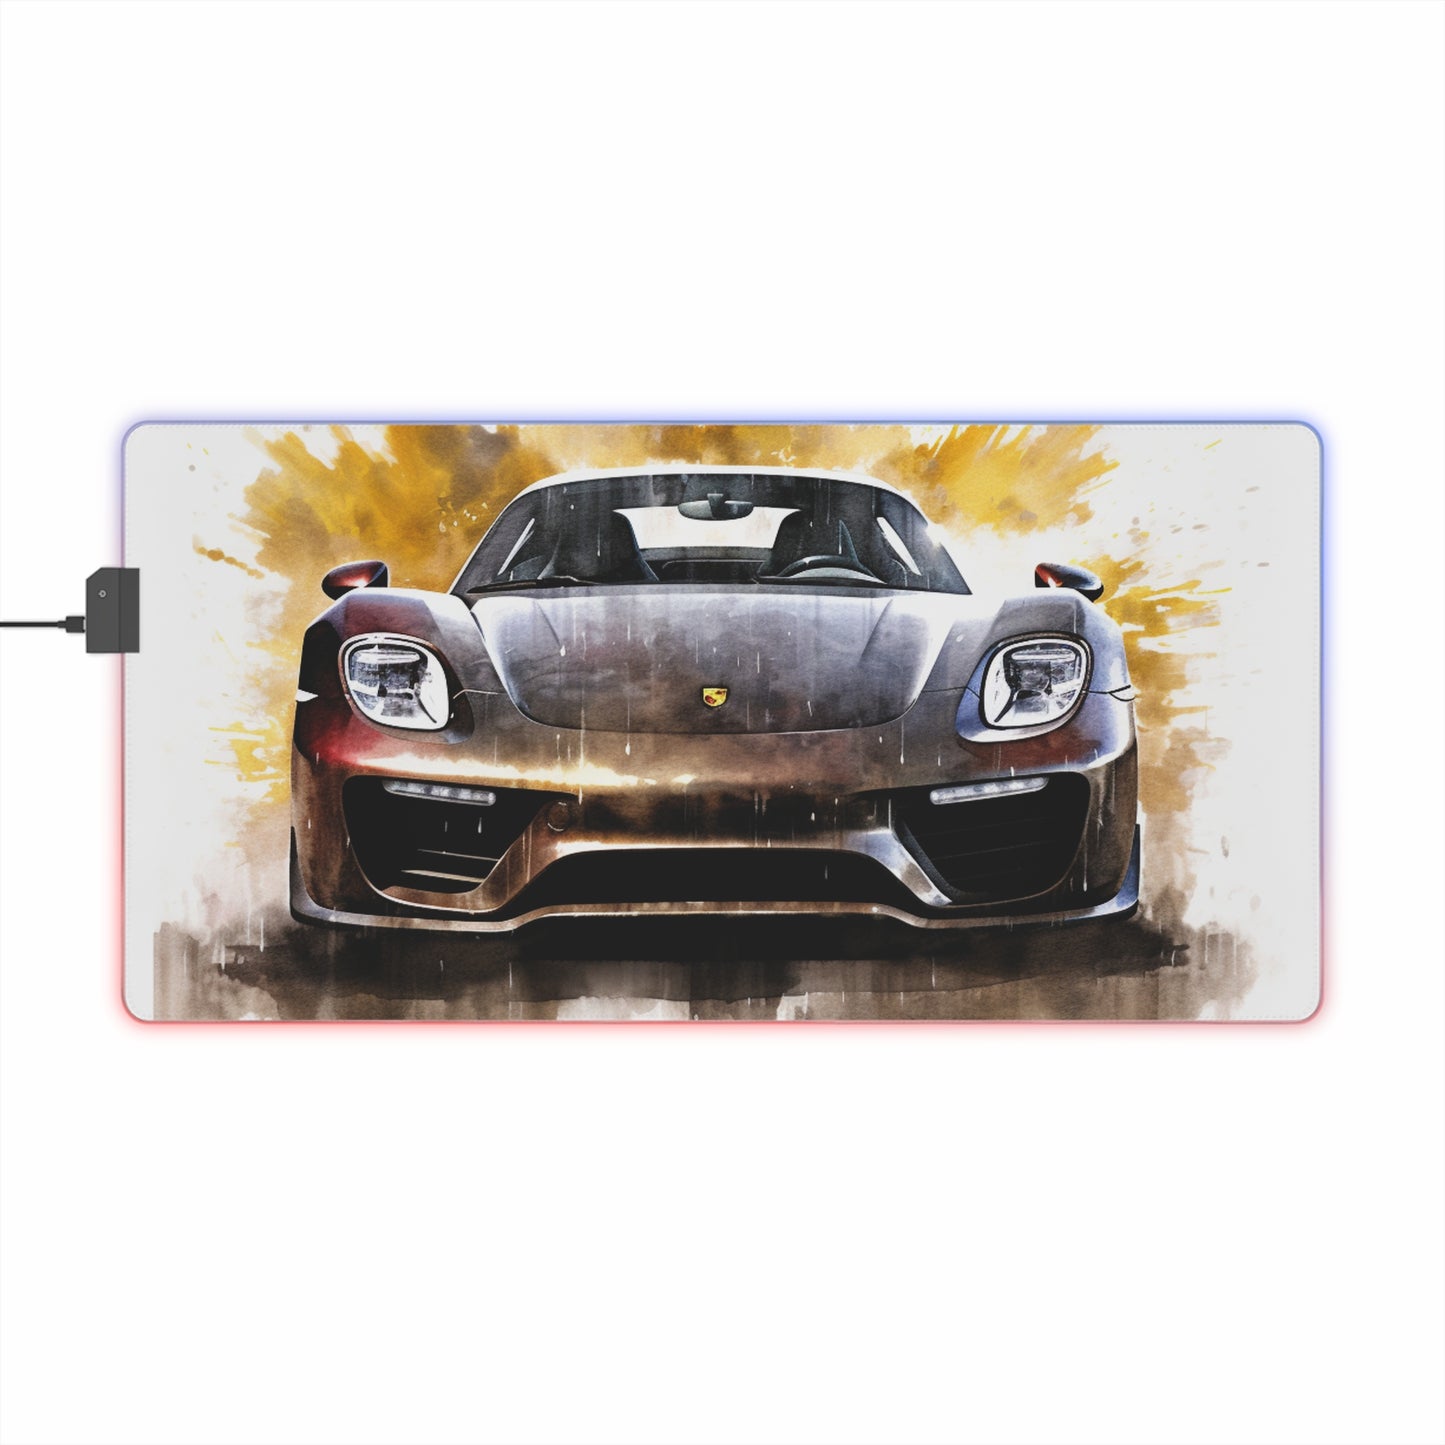 LED Gaming Mouse Pad 918 Spyder white background driving fast with water splashing 1